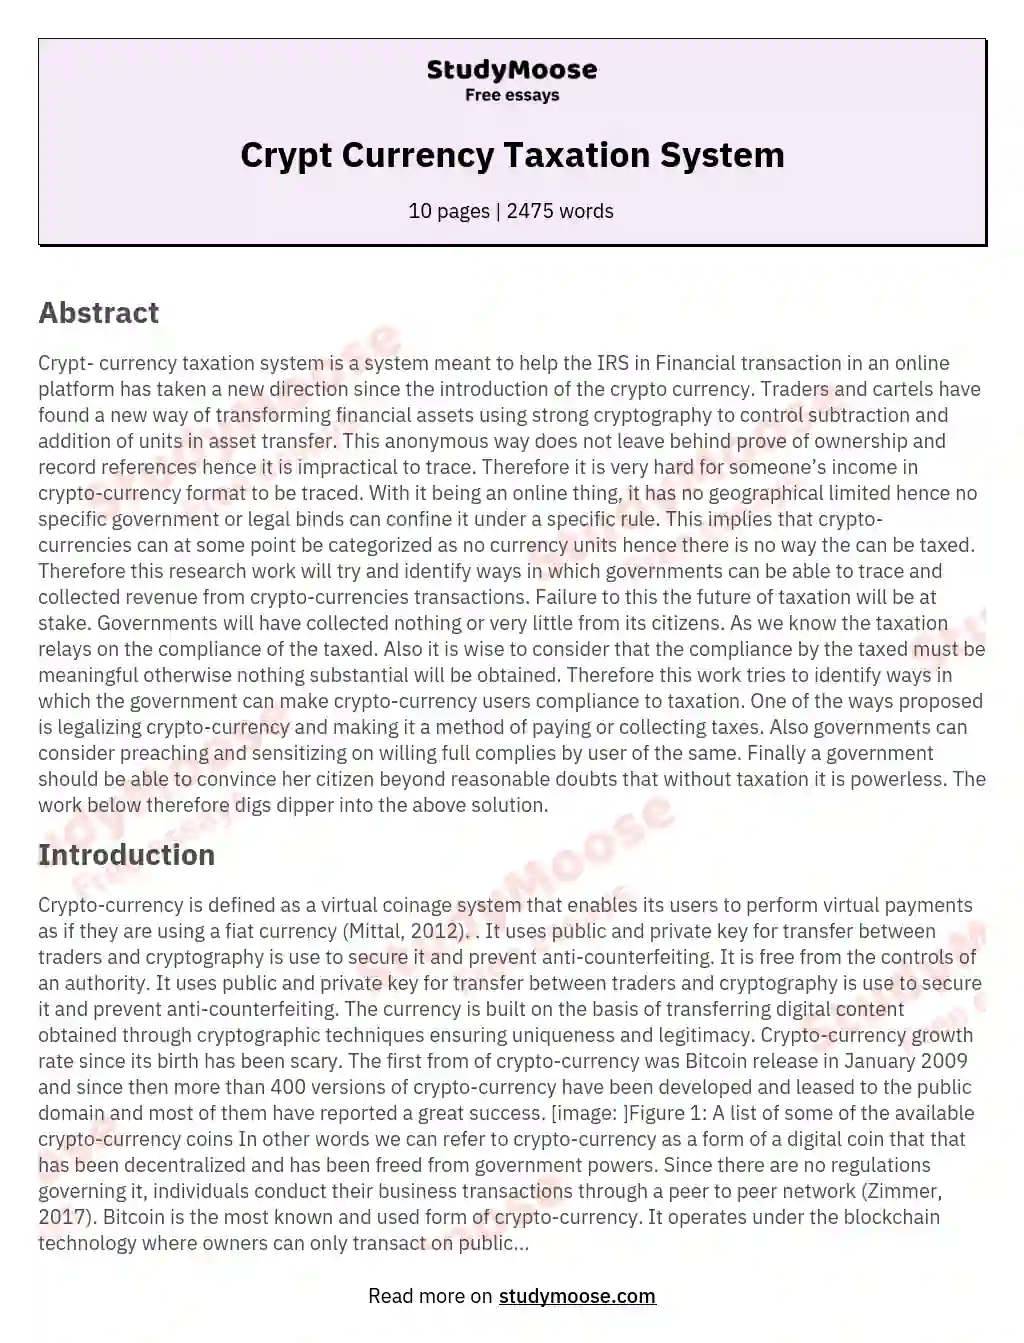 Crypt Currency Taxation System essay